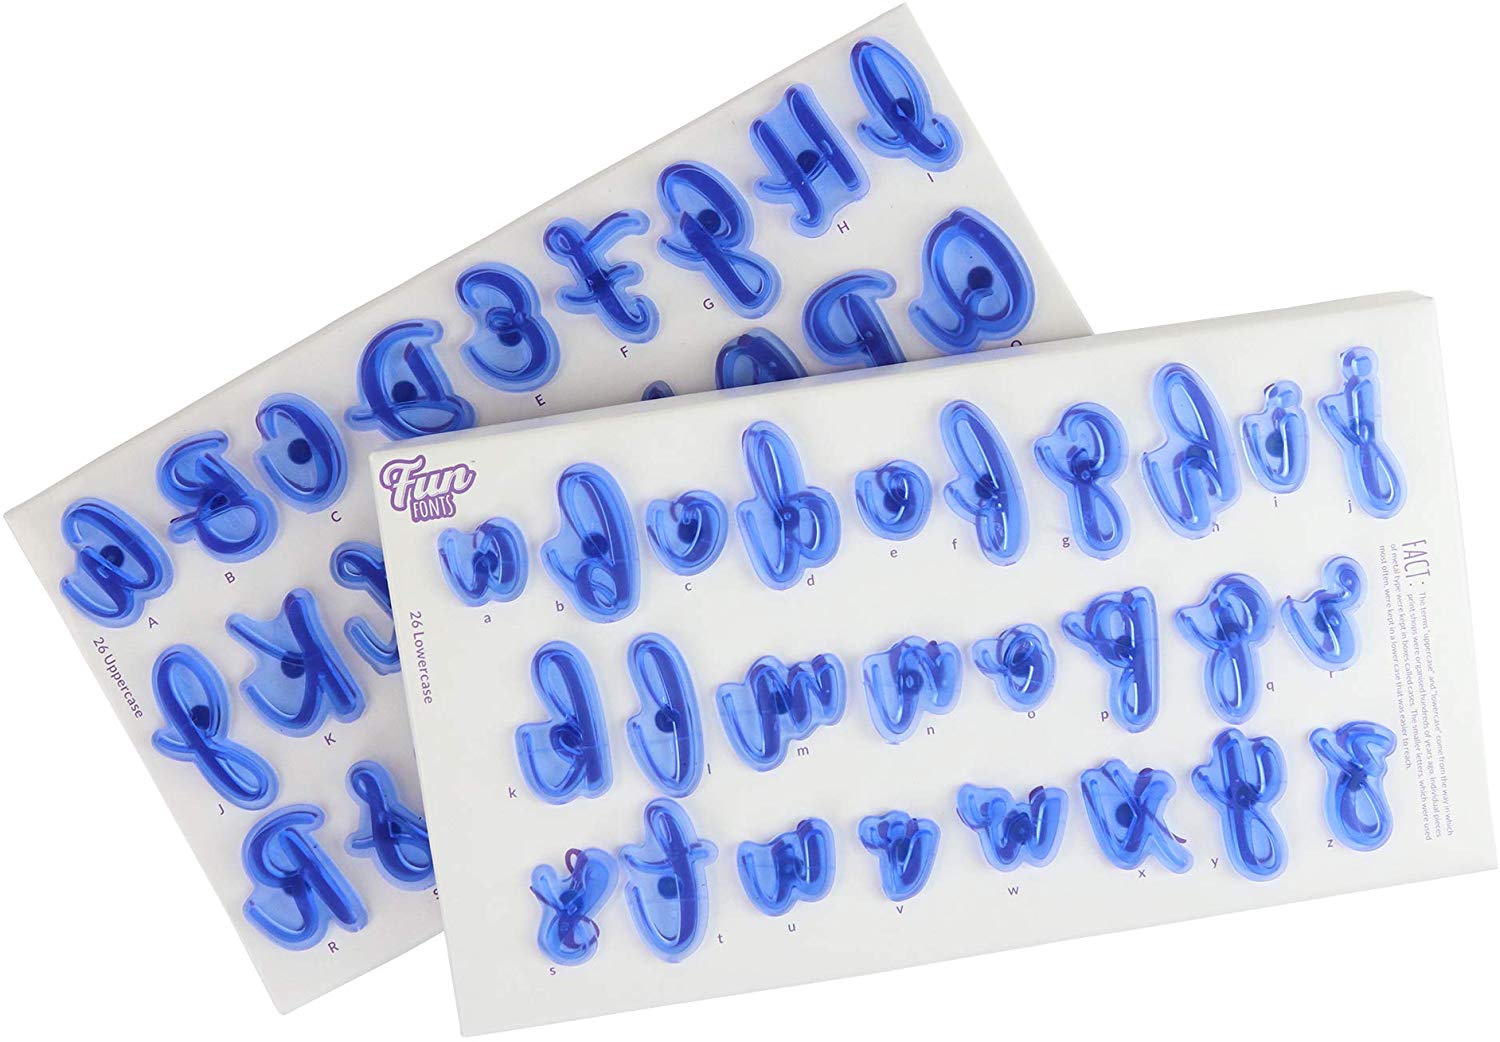 Character Font Alphabet Stamp Set w/holder – Busy Bakers Supplies